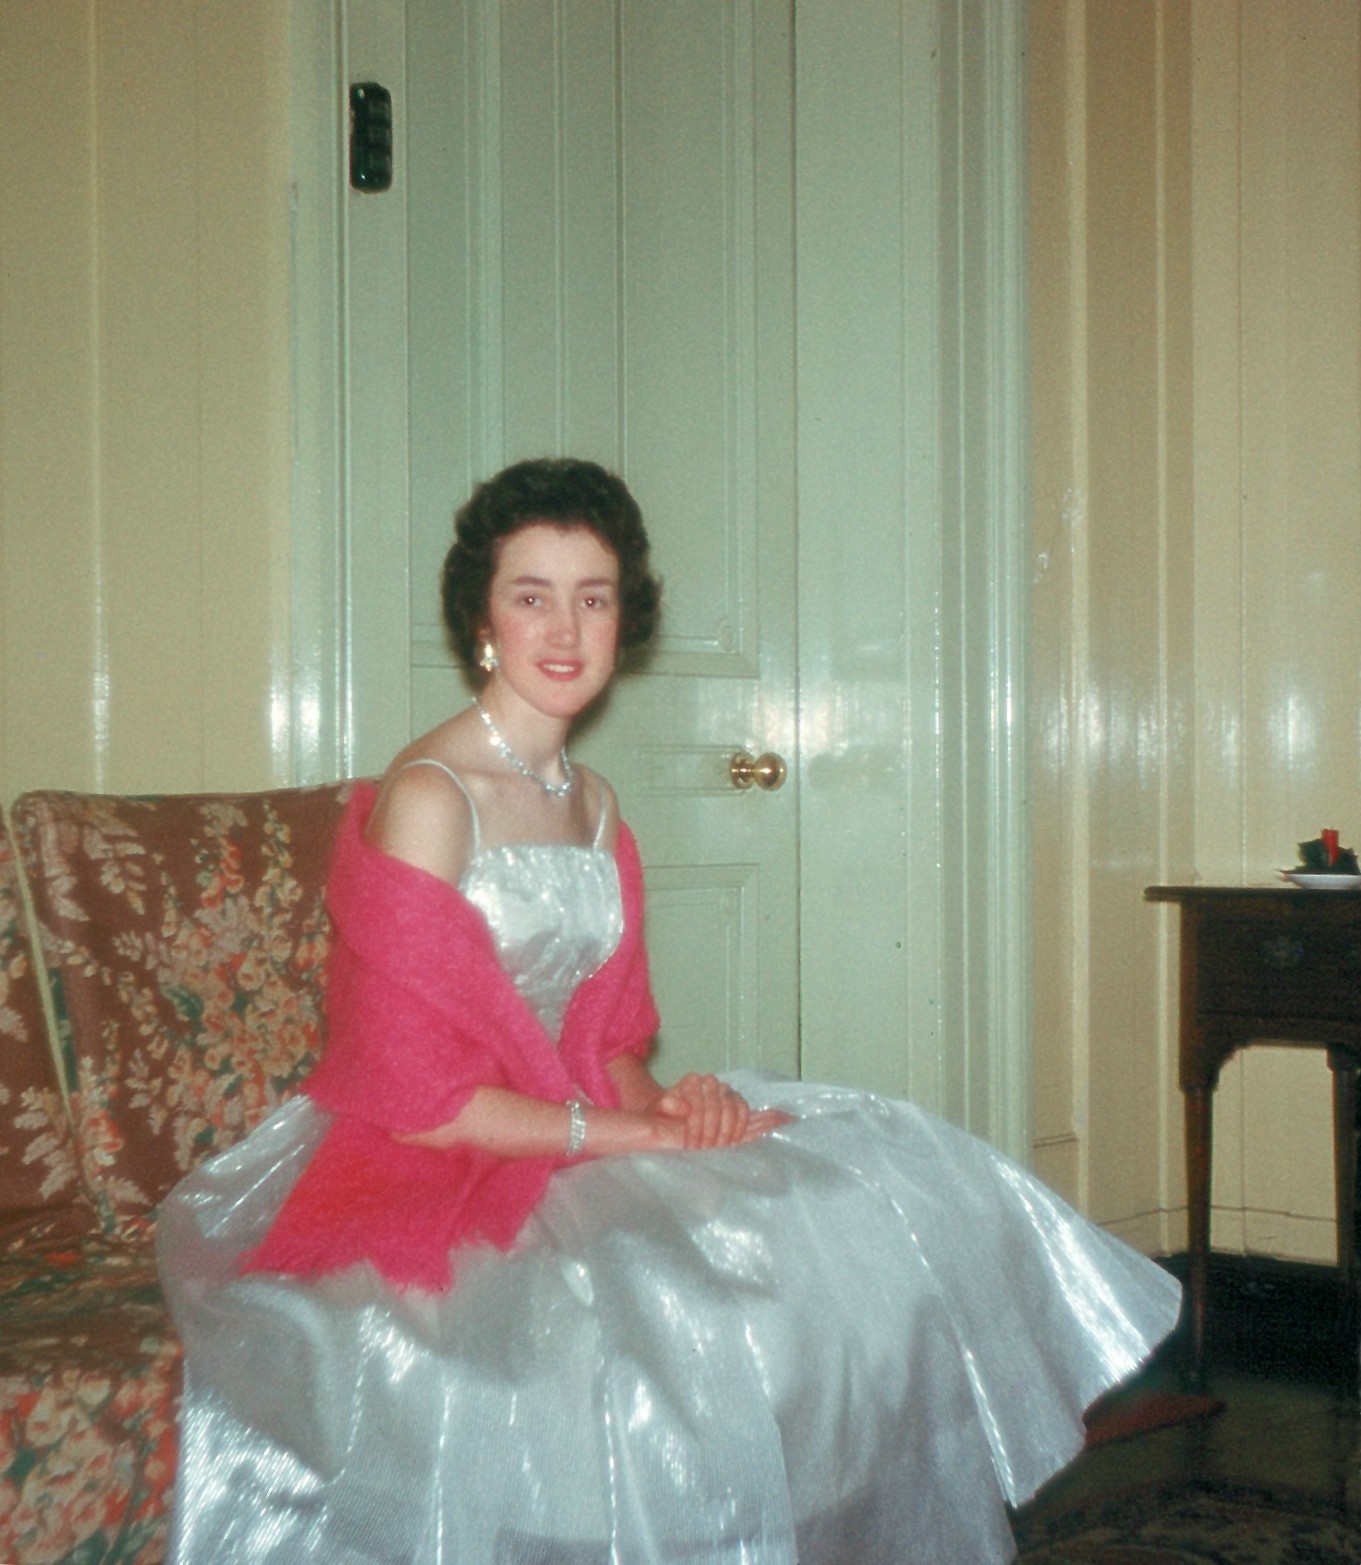 5900130s 1 February 1959 - Betty at the Ashburne formal ball.